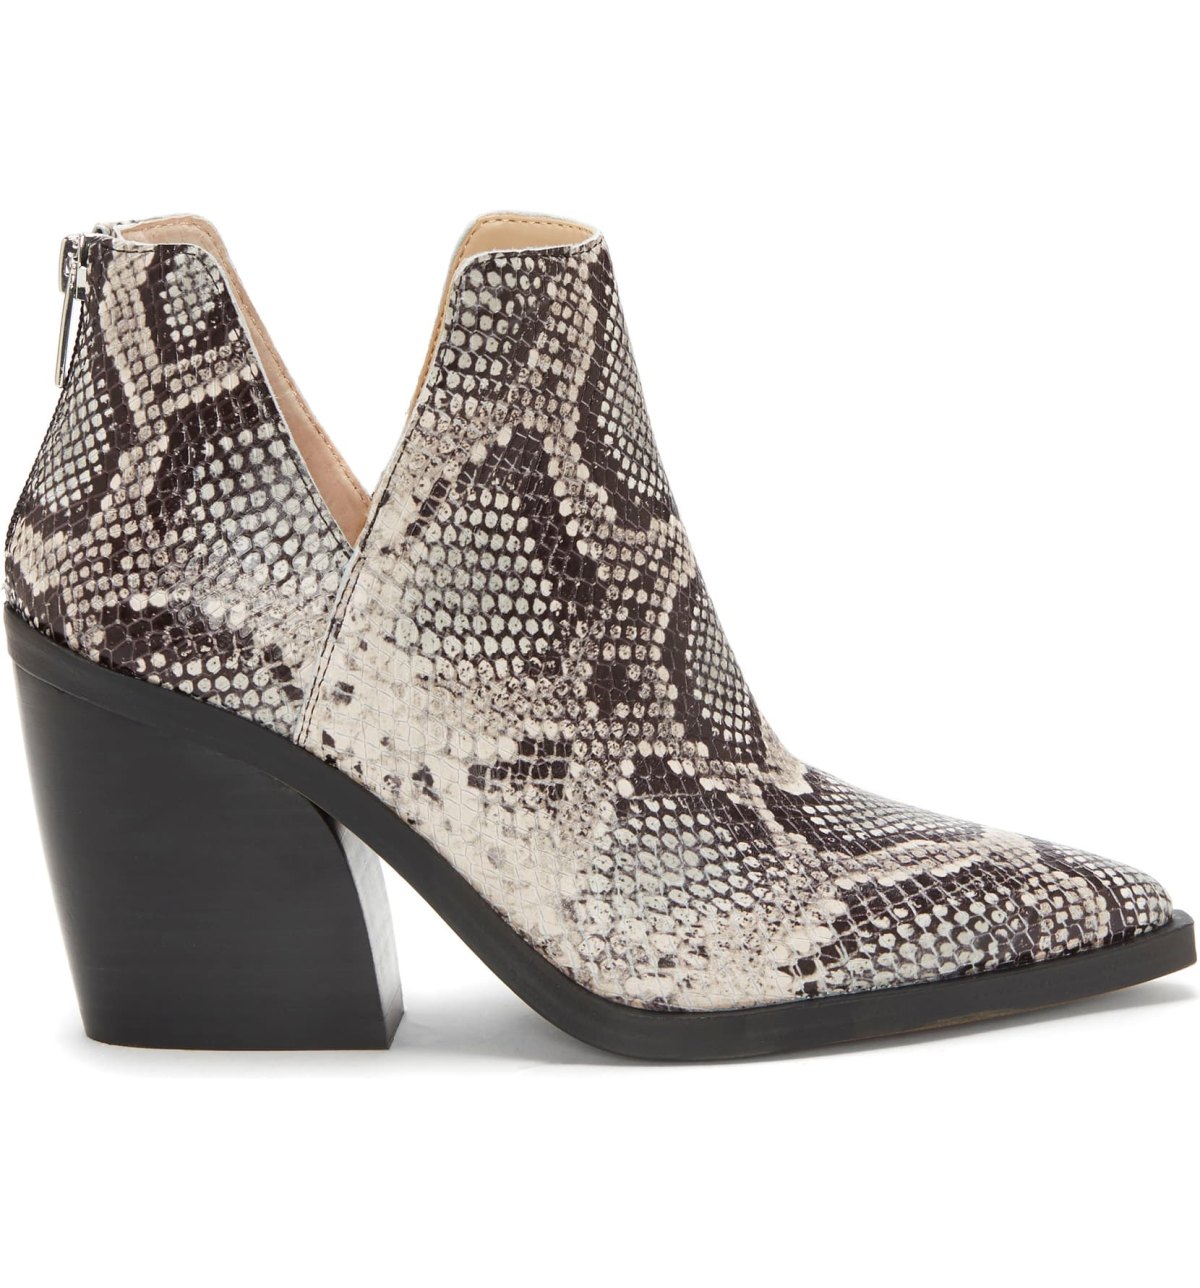 Vince Camuto Booties Perfectly Balance Classy and Edgy — 33% Off! | Us ...